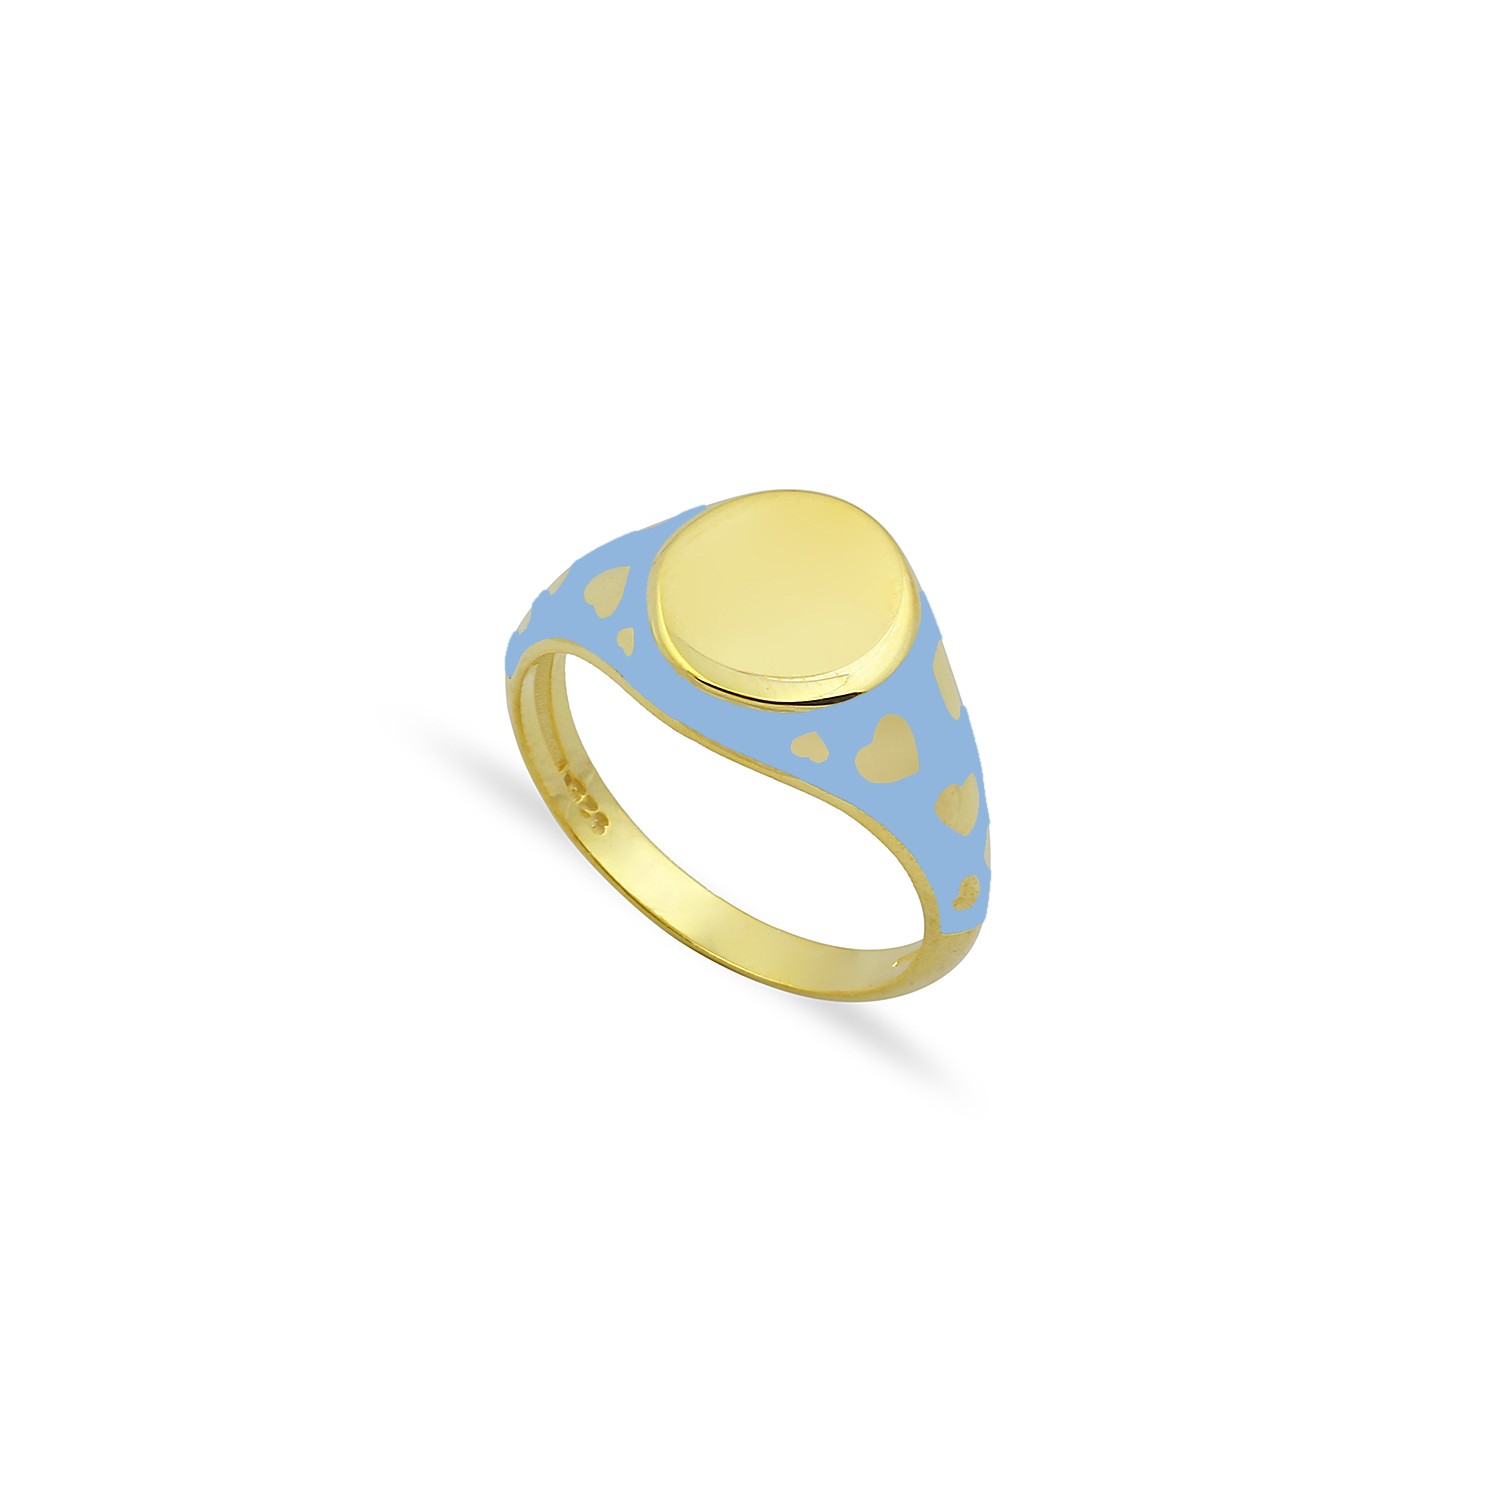 Sterling Silver Yellow Gold Plated Signet Ring With Blue Enamel Heart Design